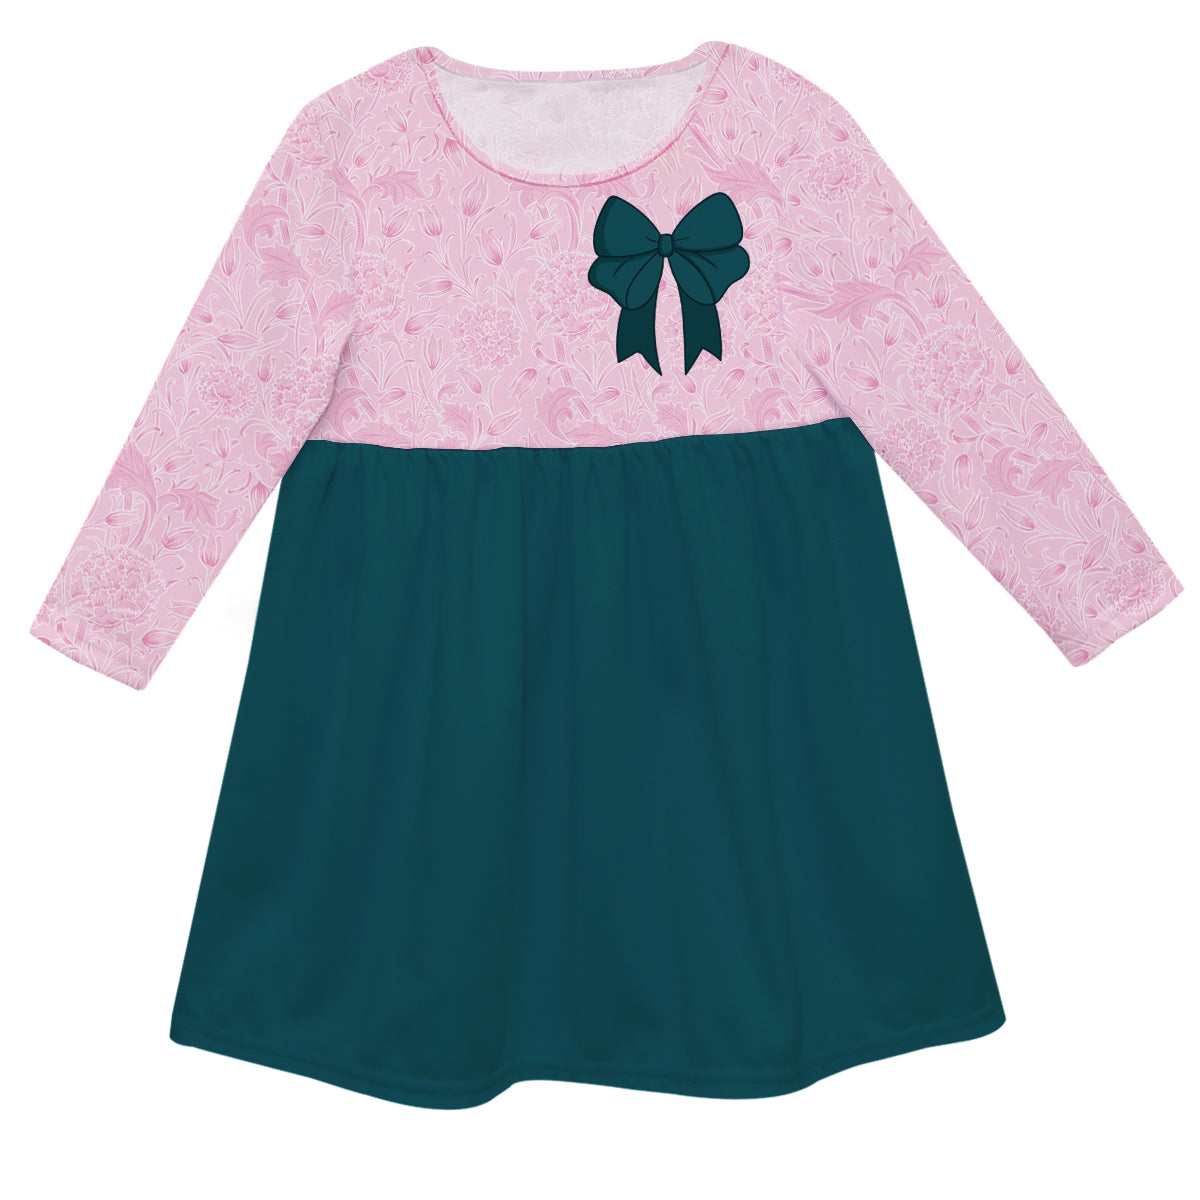 Girls green and pink dress - Wimziy&Co.